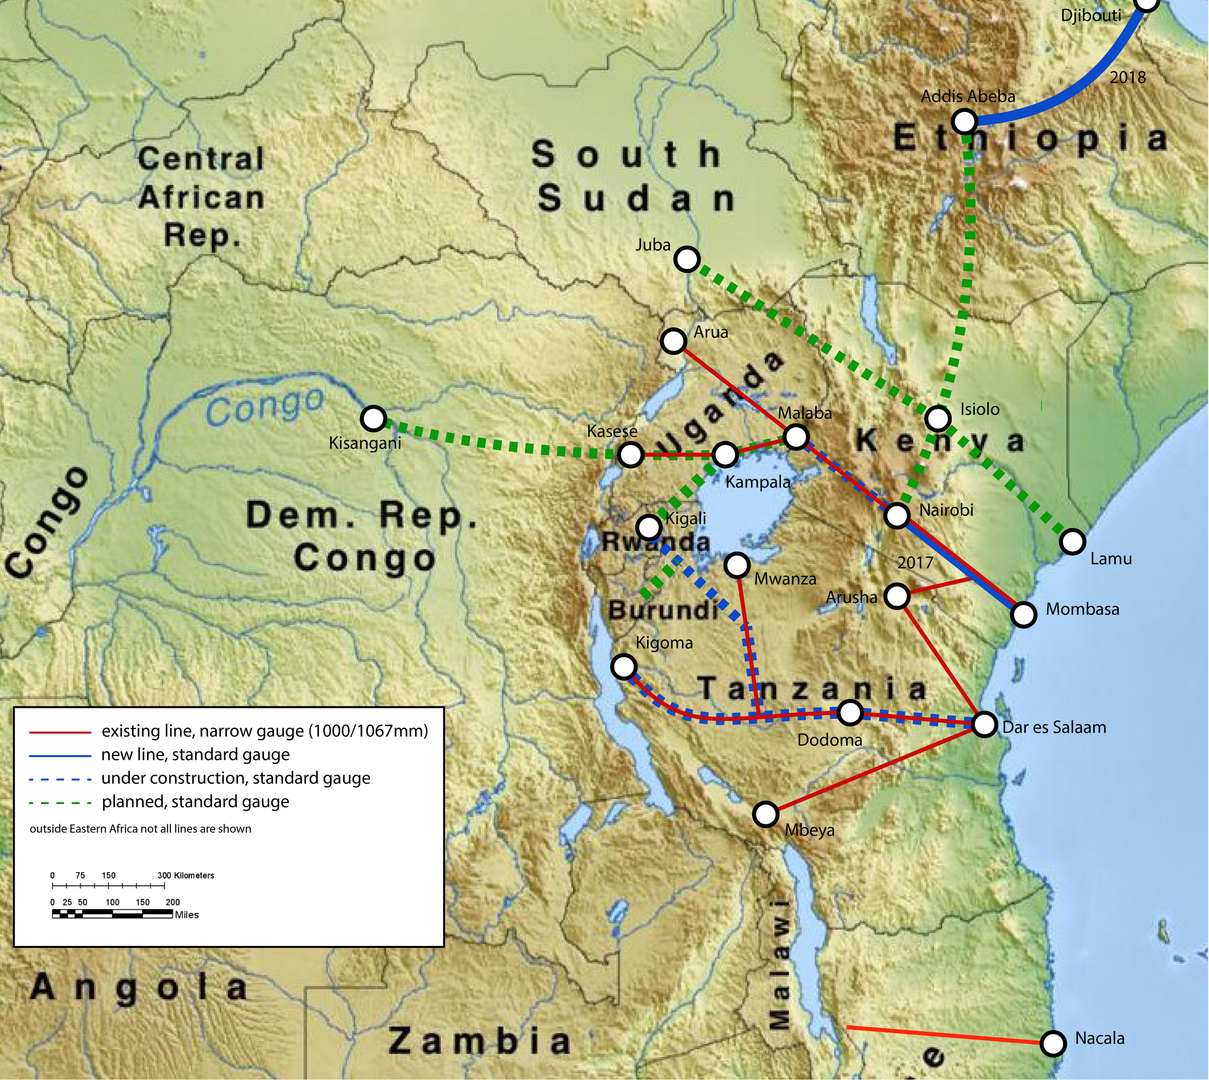 East African Railway Master Plan (Classical geographer | Wikimedia Commons)